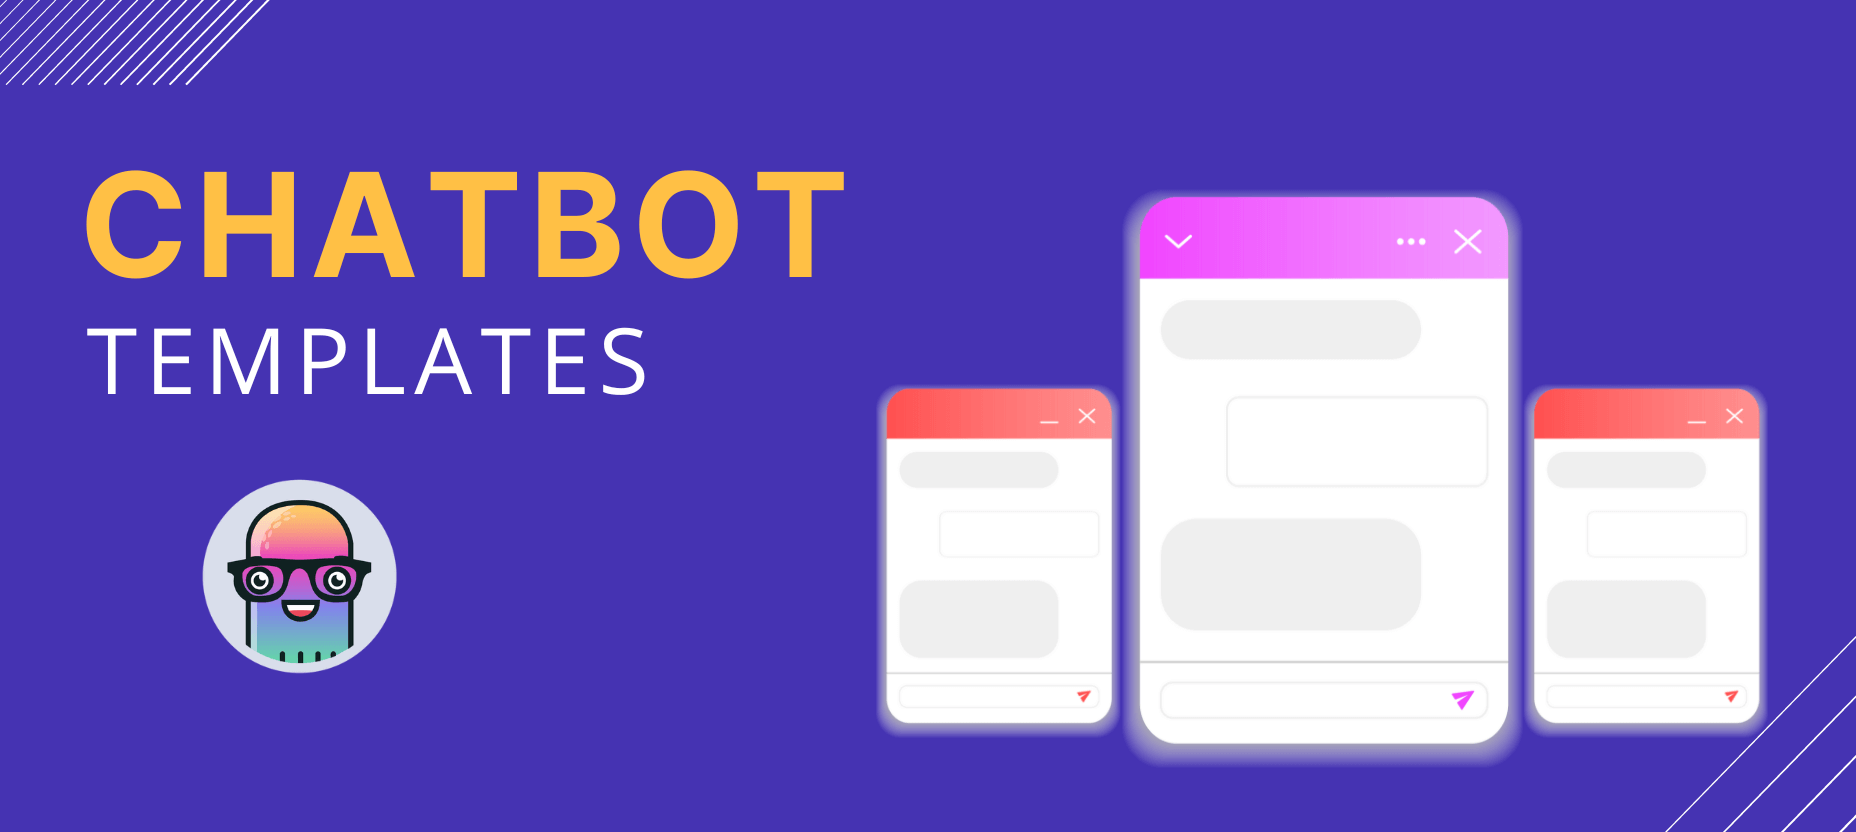 Discover the best chatbot templates that are right for your business